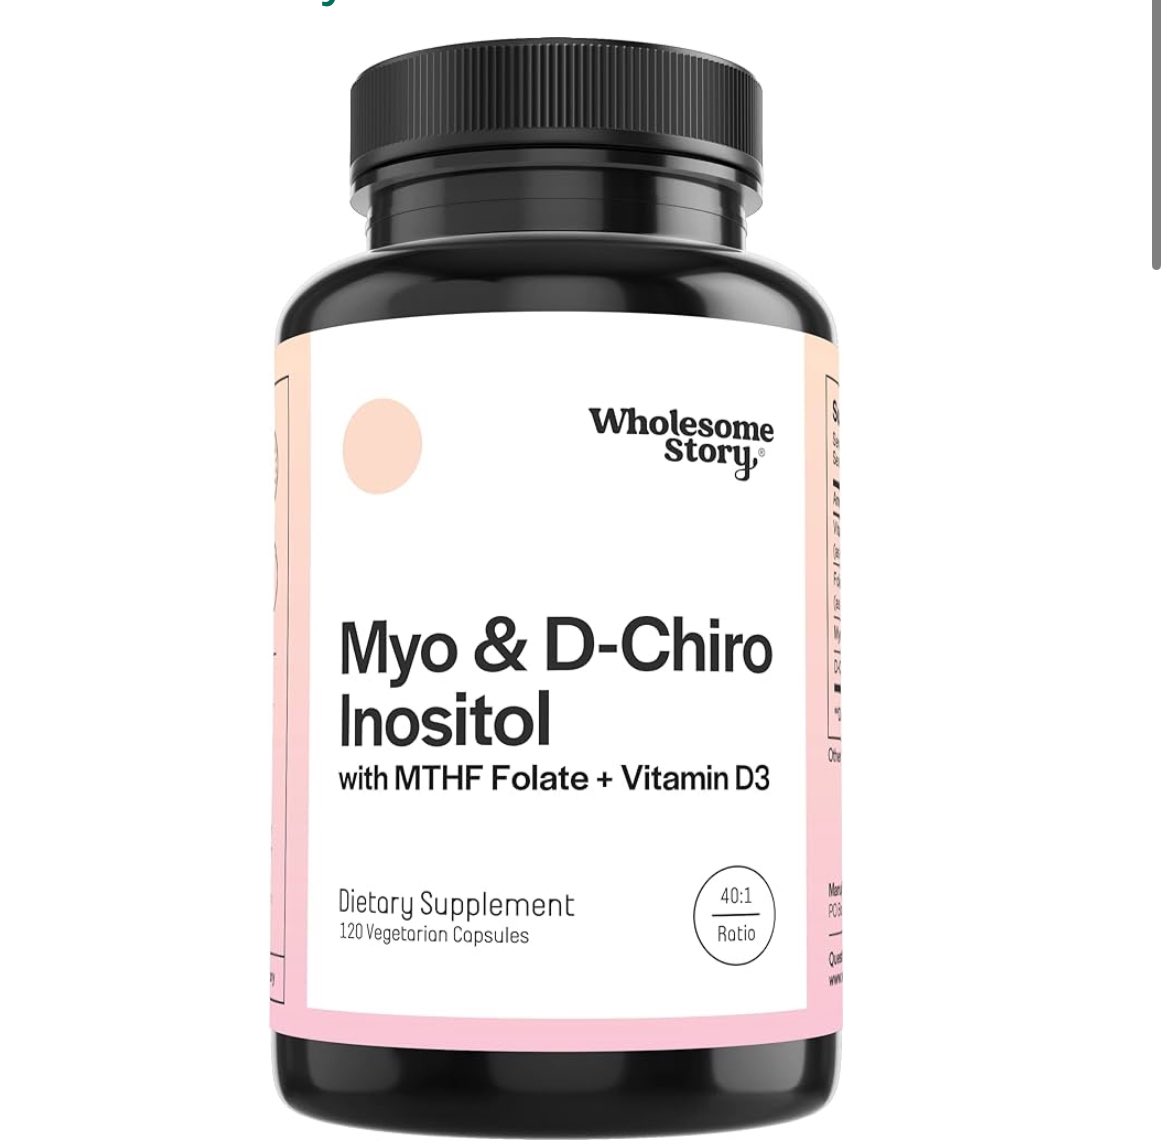 For an alternative that helped me personally with my hormonal imbalance issues was myo-d inositol supplements. It not only helped me start ovulating again BUT it helped so much with depression and anxiety 
You can do some research here 

my.clevelandclinic.org/health/drugs/2…